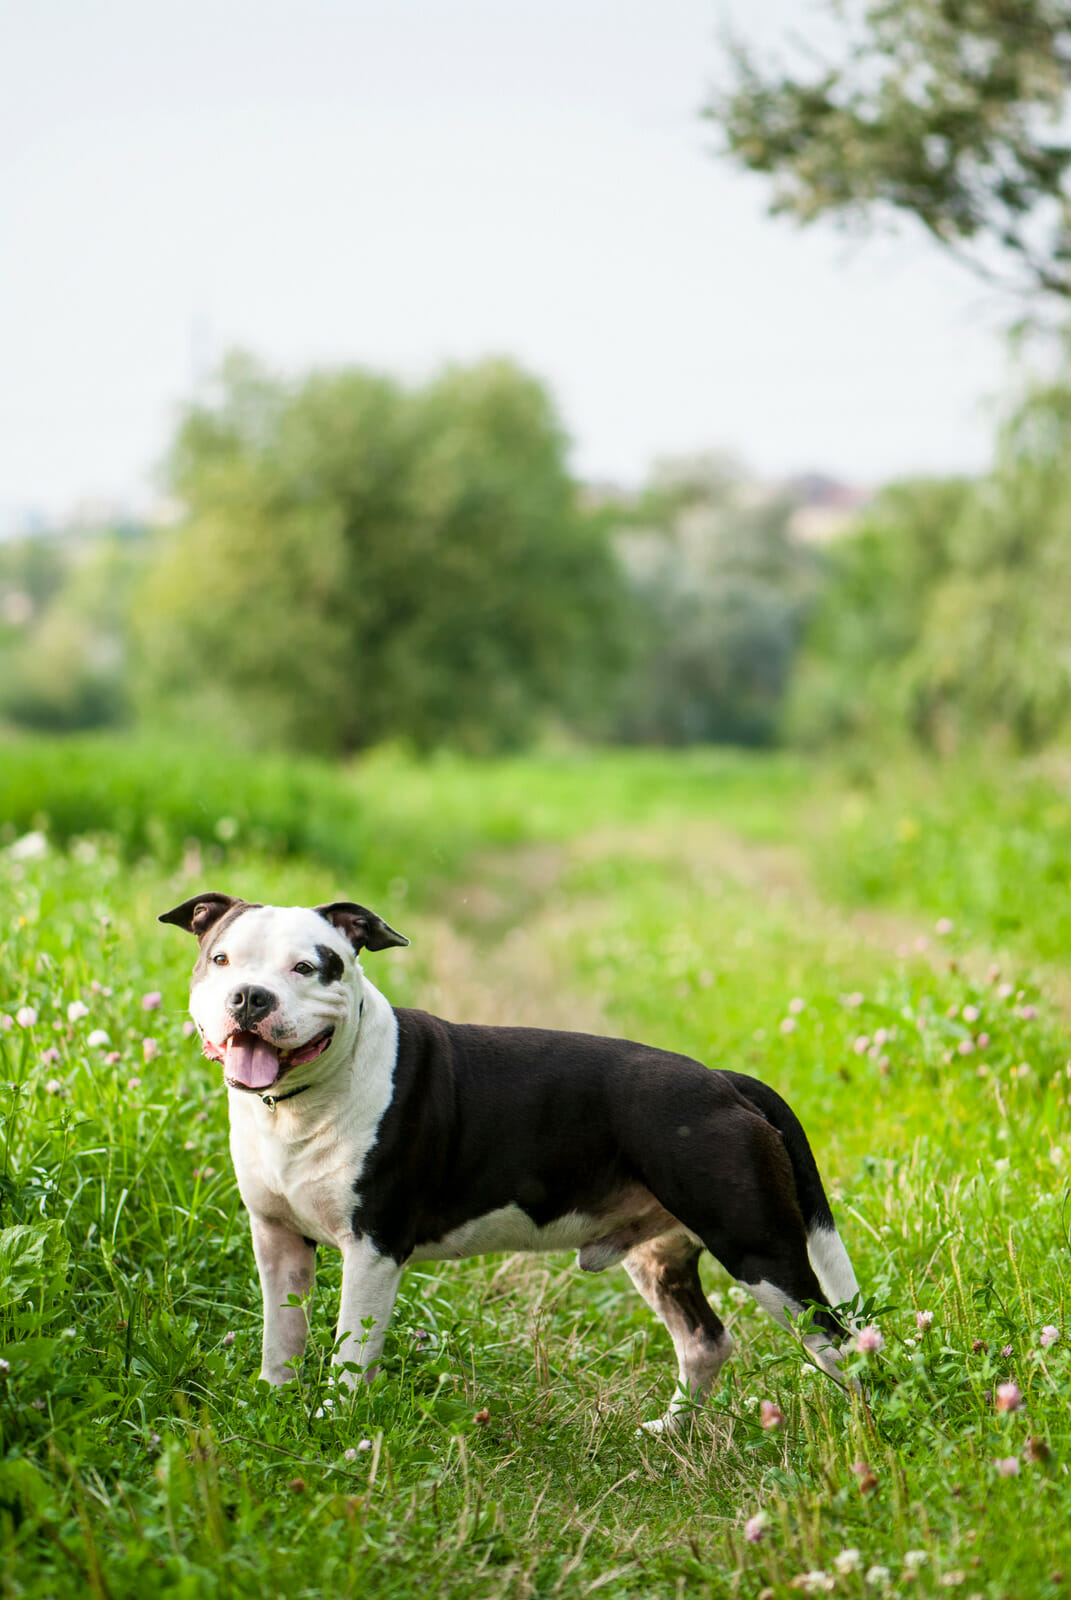 American Staffordshire Terrier standing in a field